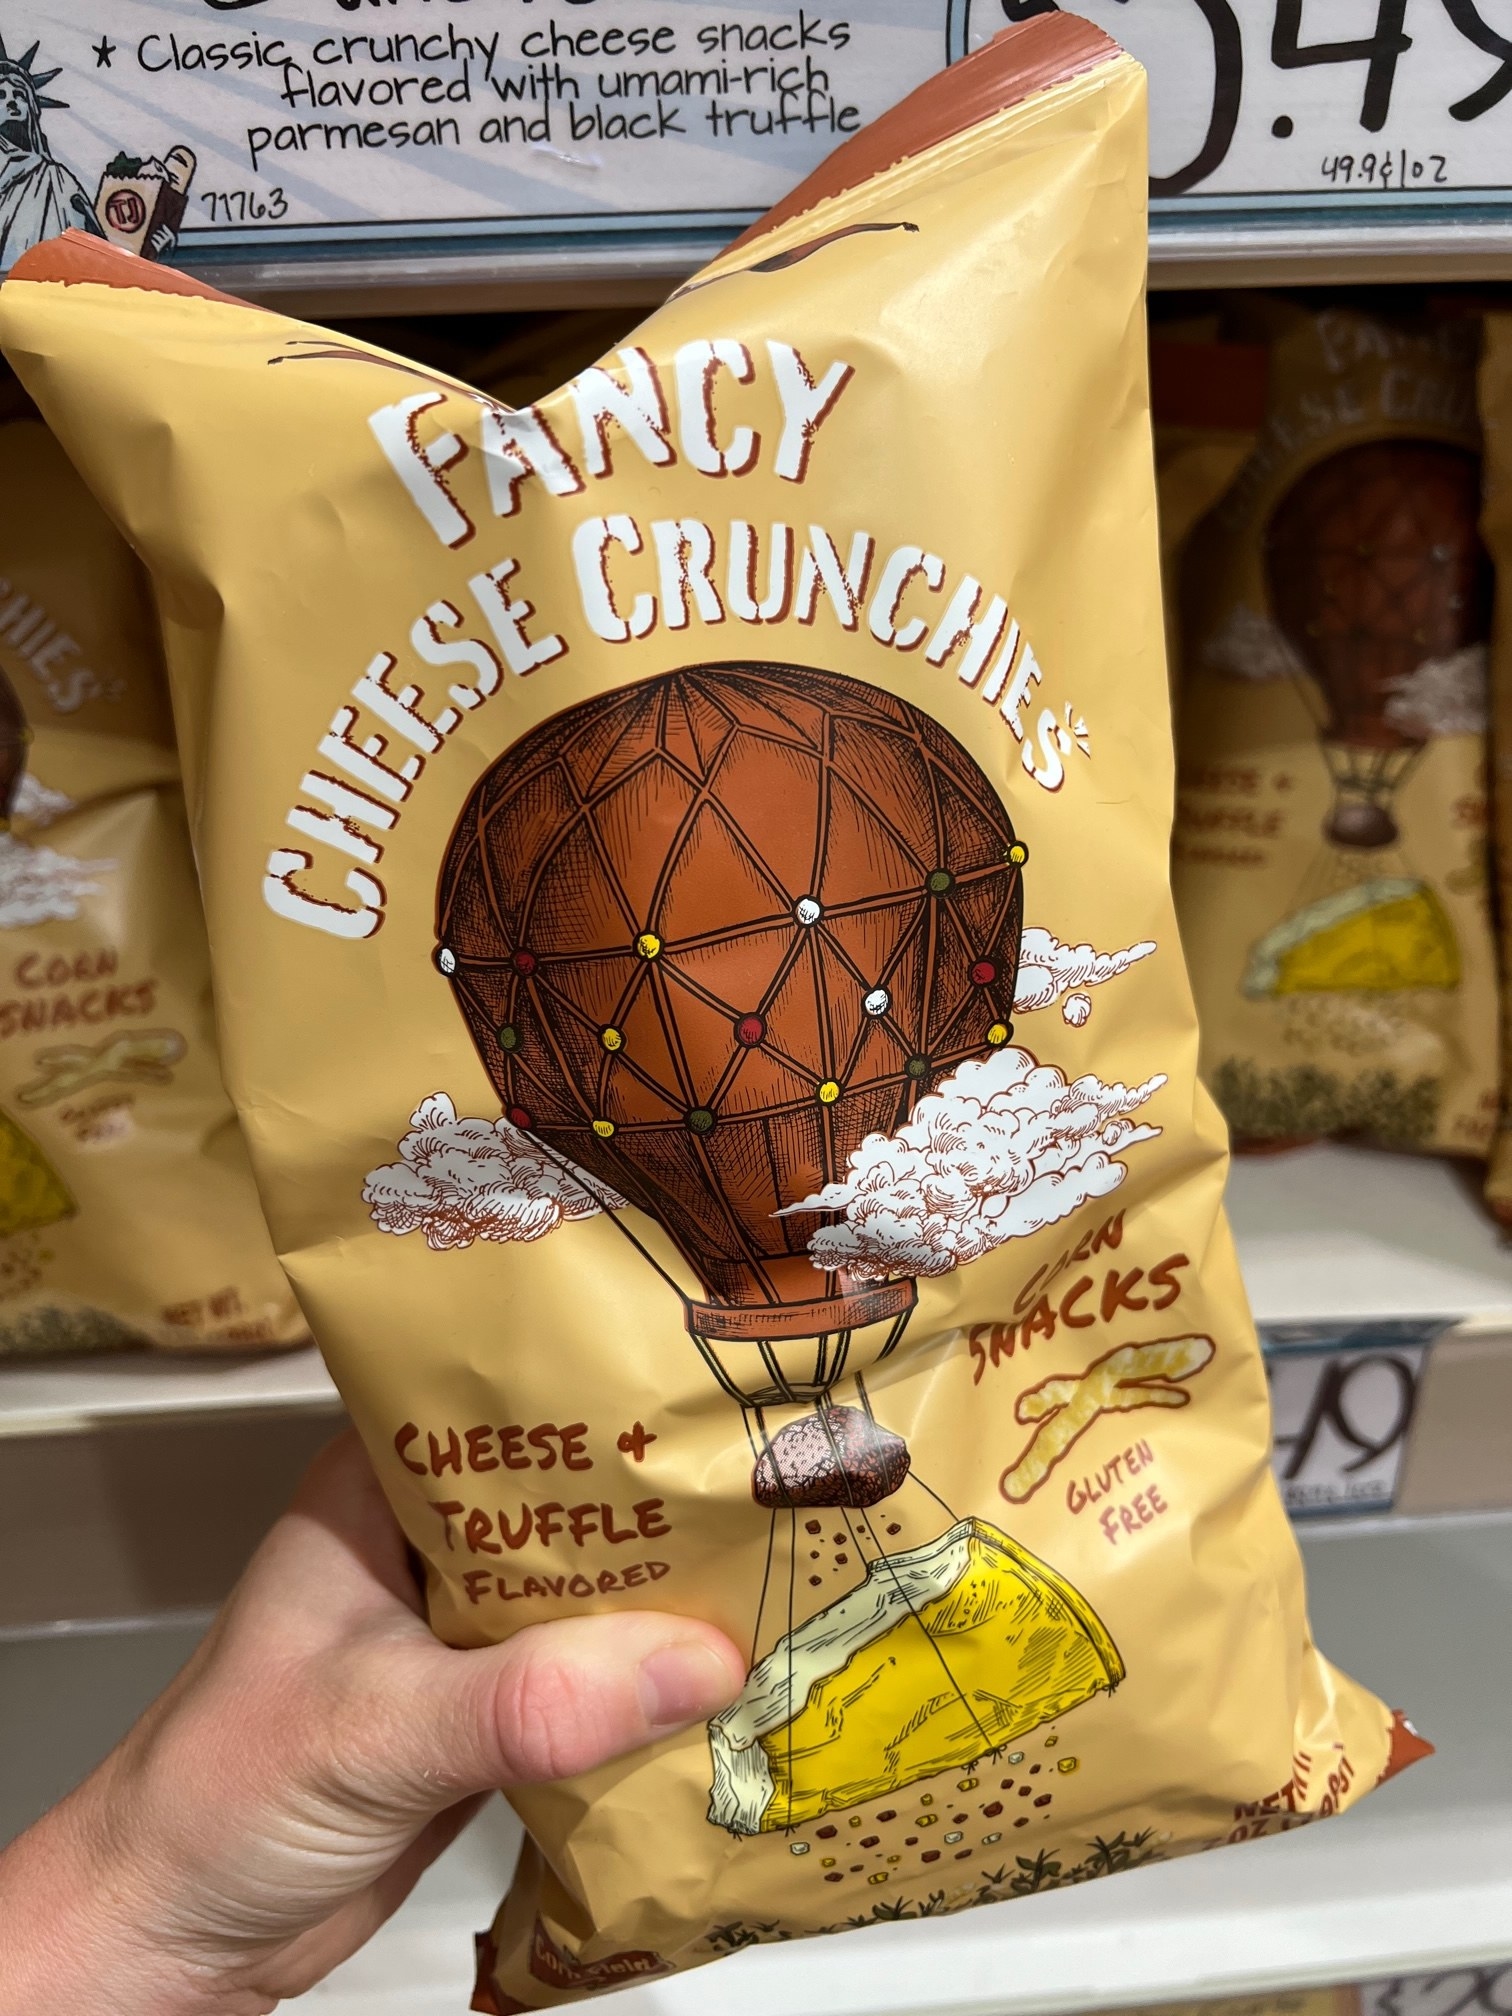 A bag of Fancy Cheese Crunchies